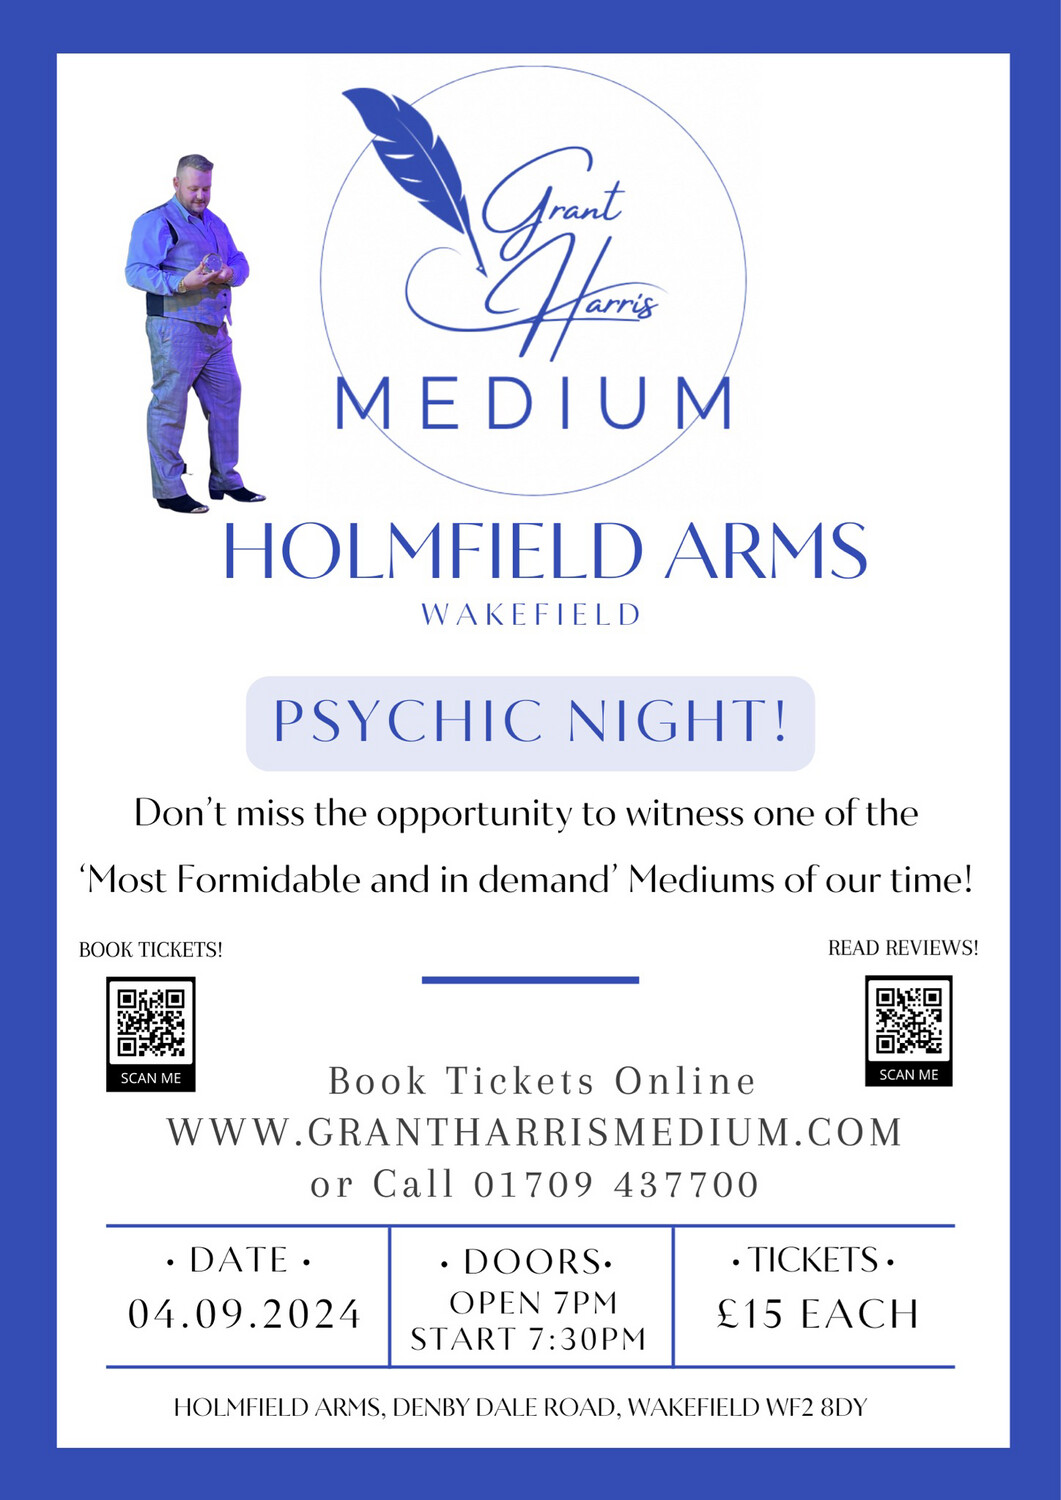 Psychic Night | Holmfield Arms, Wakefield, Wed 4th September 2024